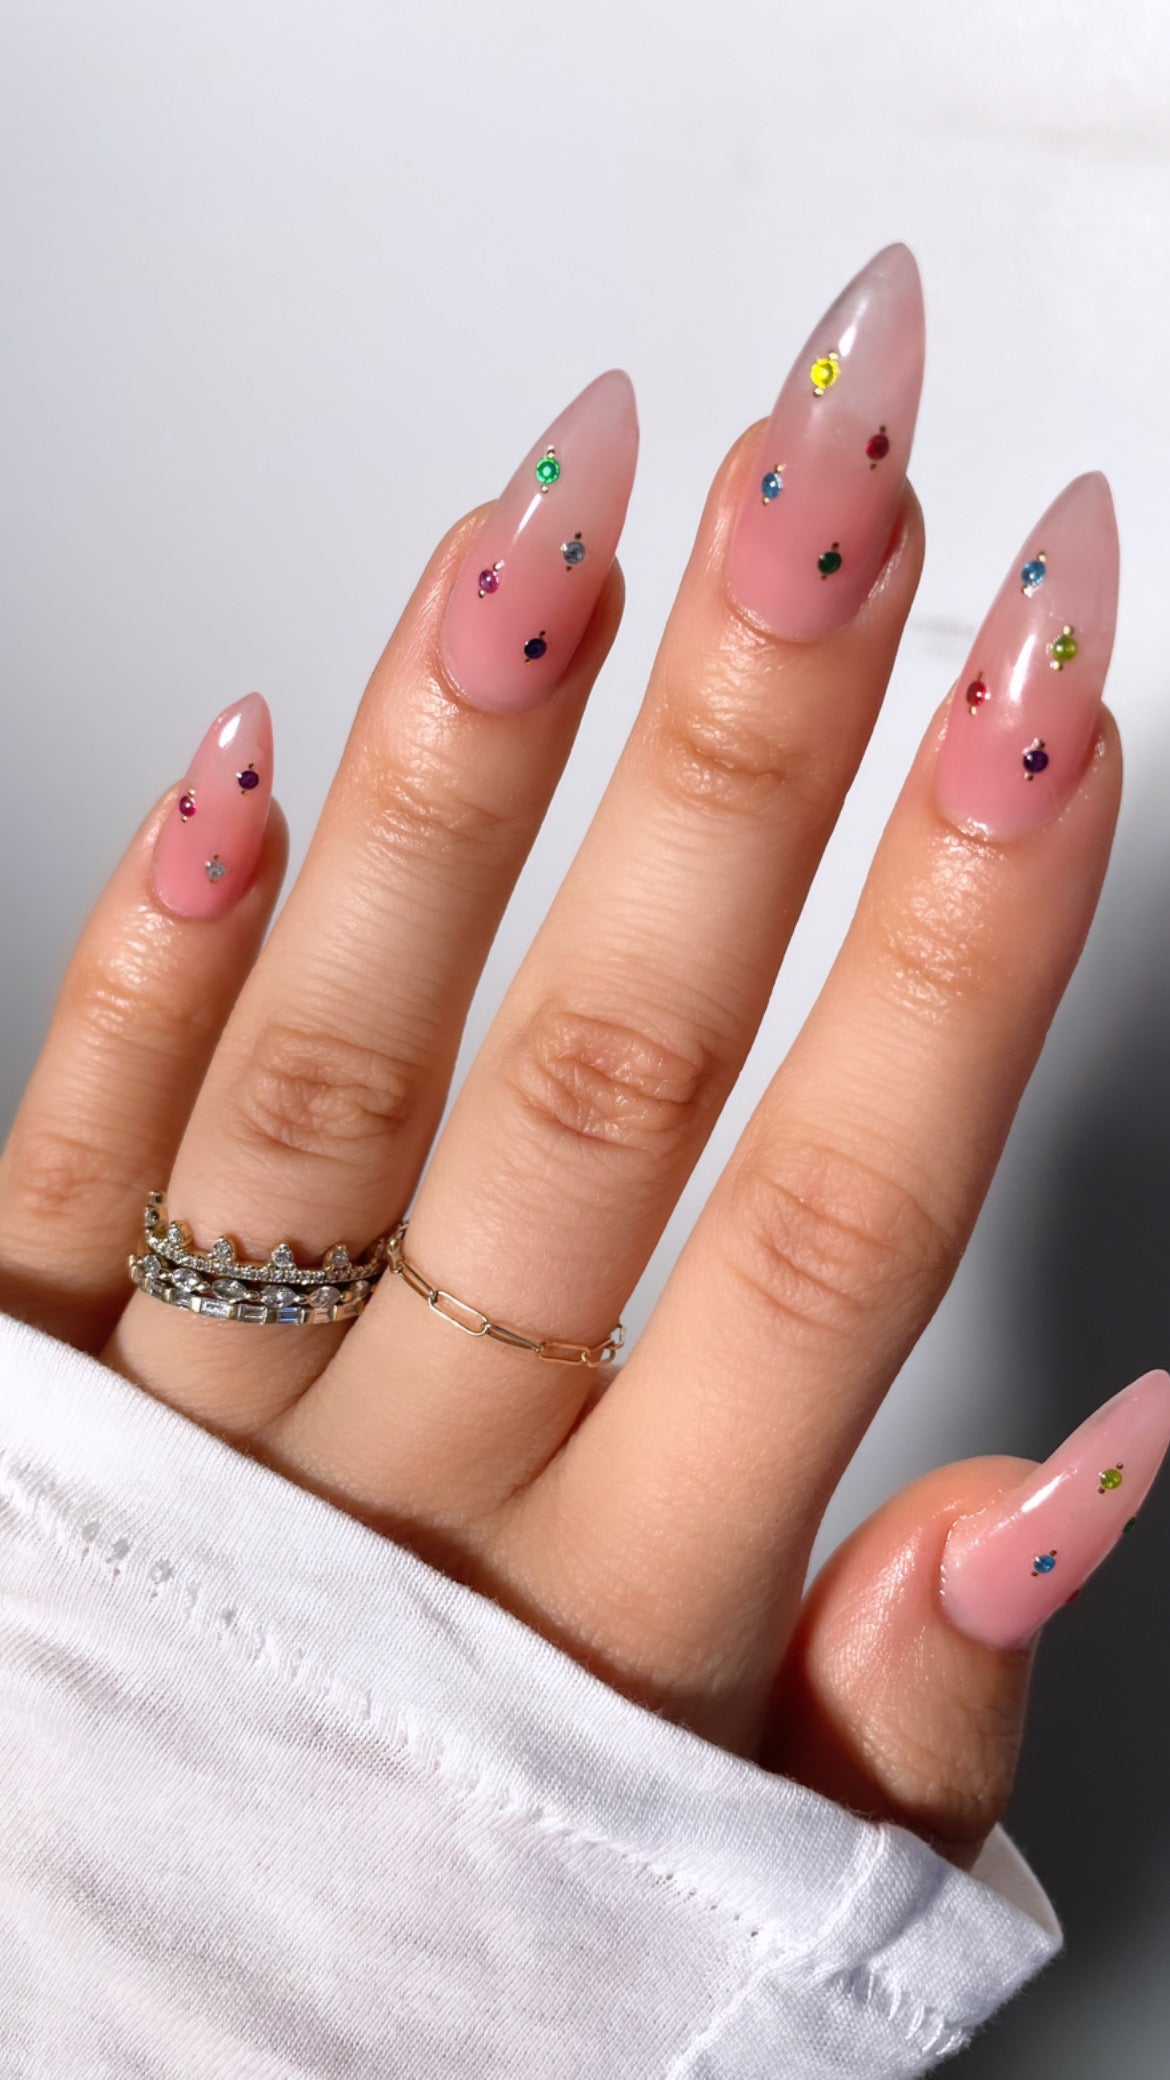 Jewels Nail Art Stickers on nude nails